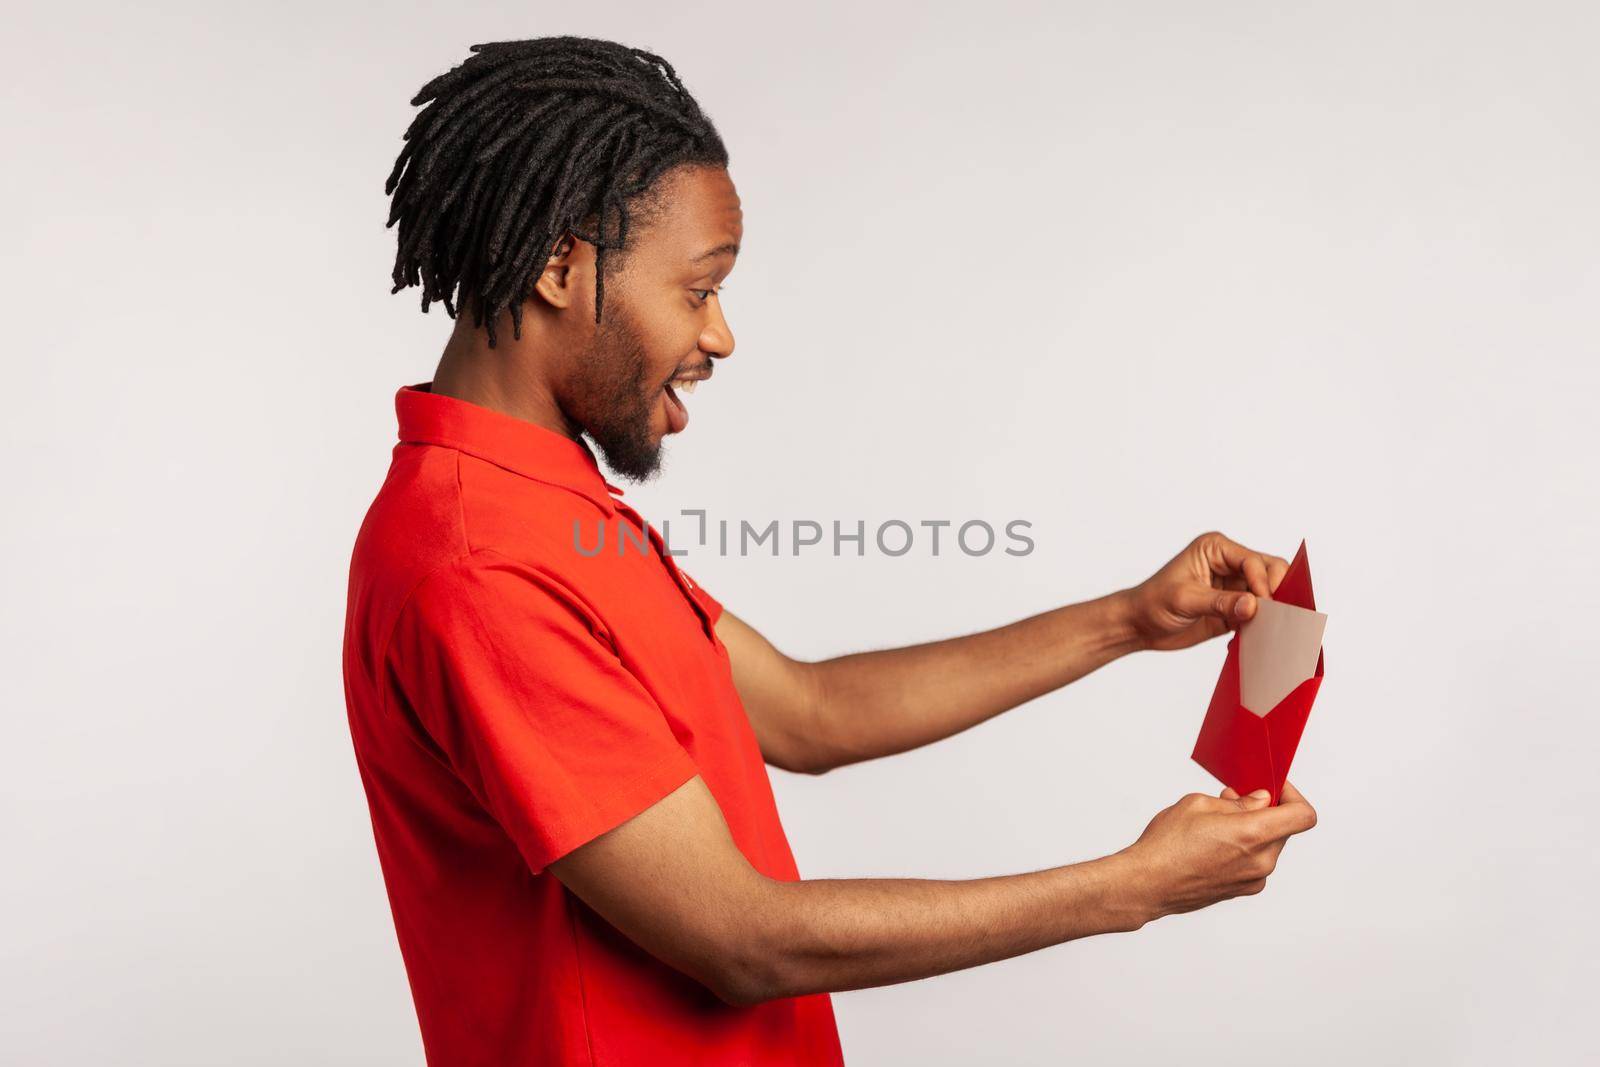 Side view of positive man with dreadlocks wearing red casual style T-shirt, opening letter in red envelope, holding greeting card and feels happy. Indoor studio shot isolated on gray background.